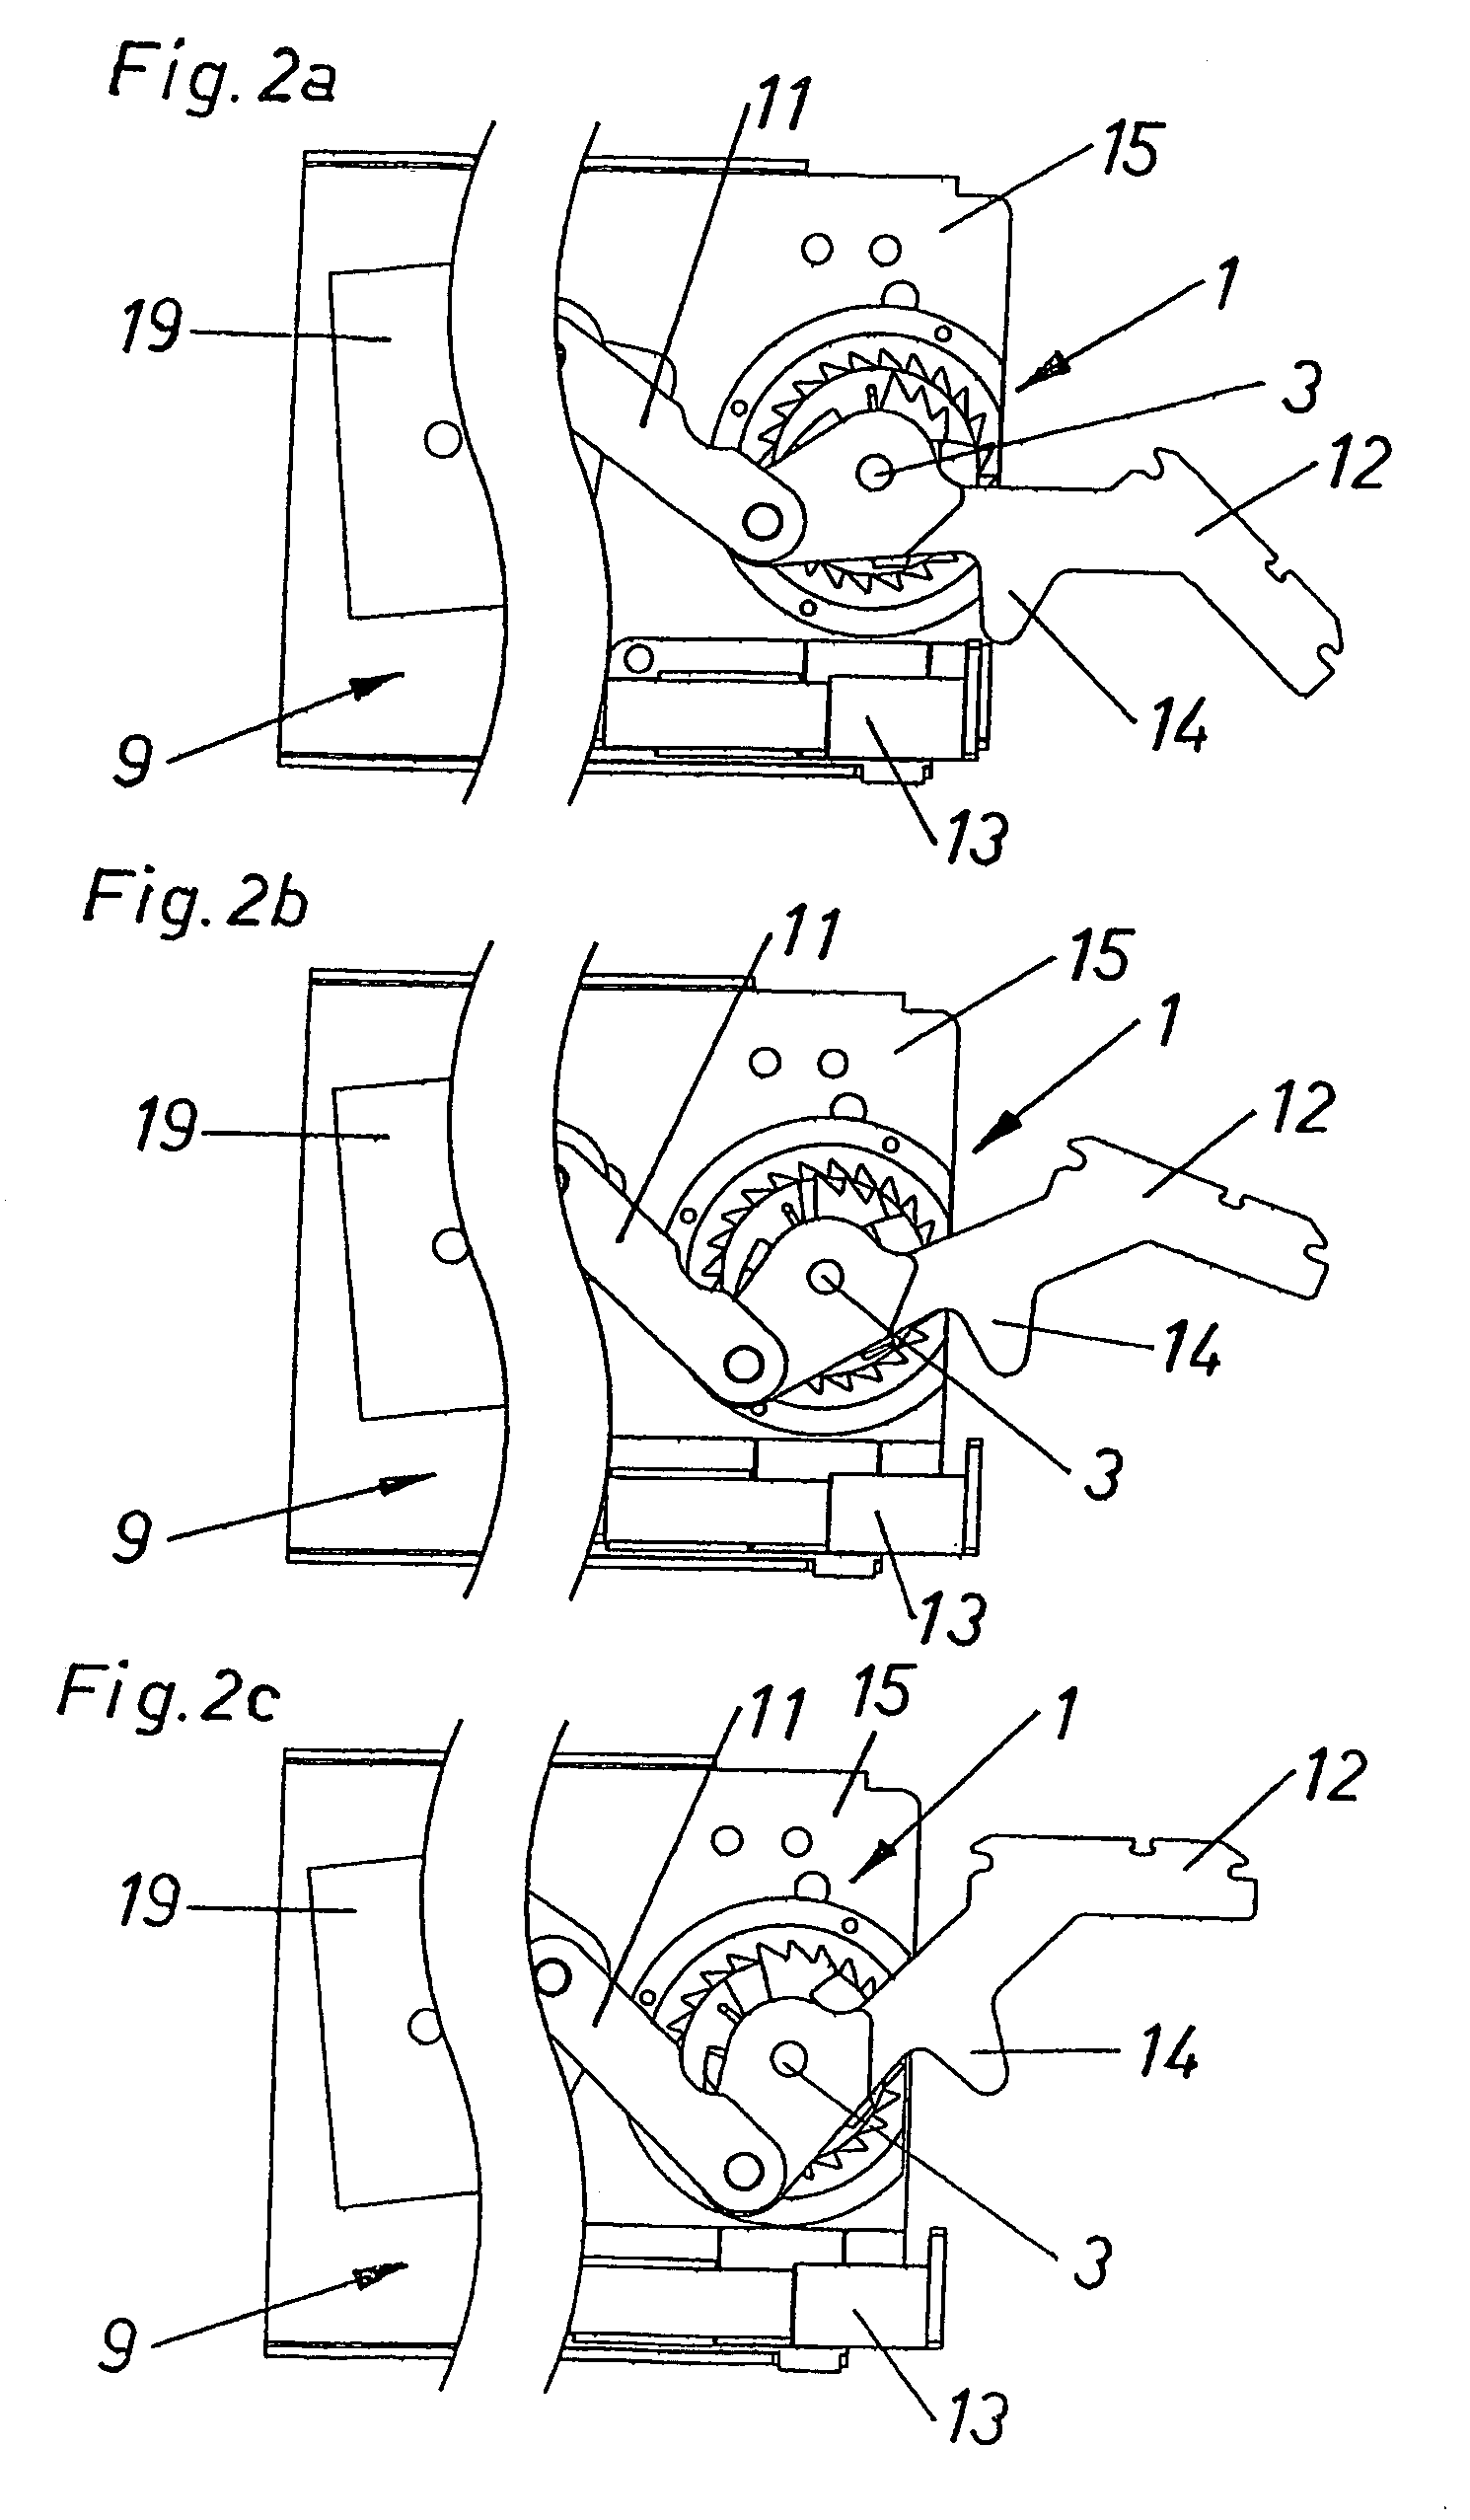 Actuating device with at least one actuating arm